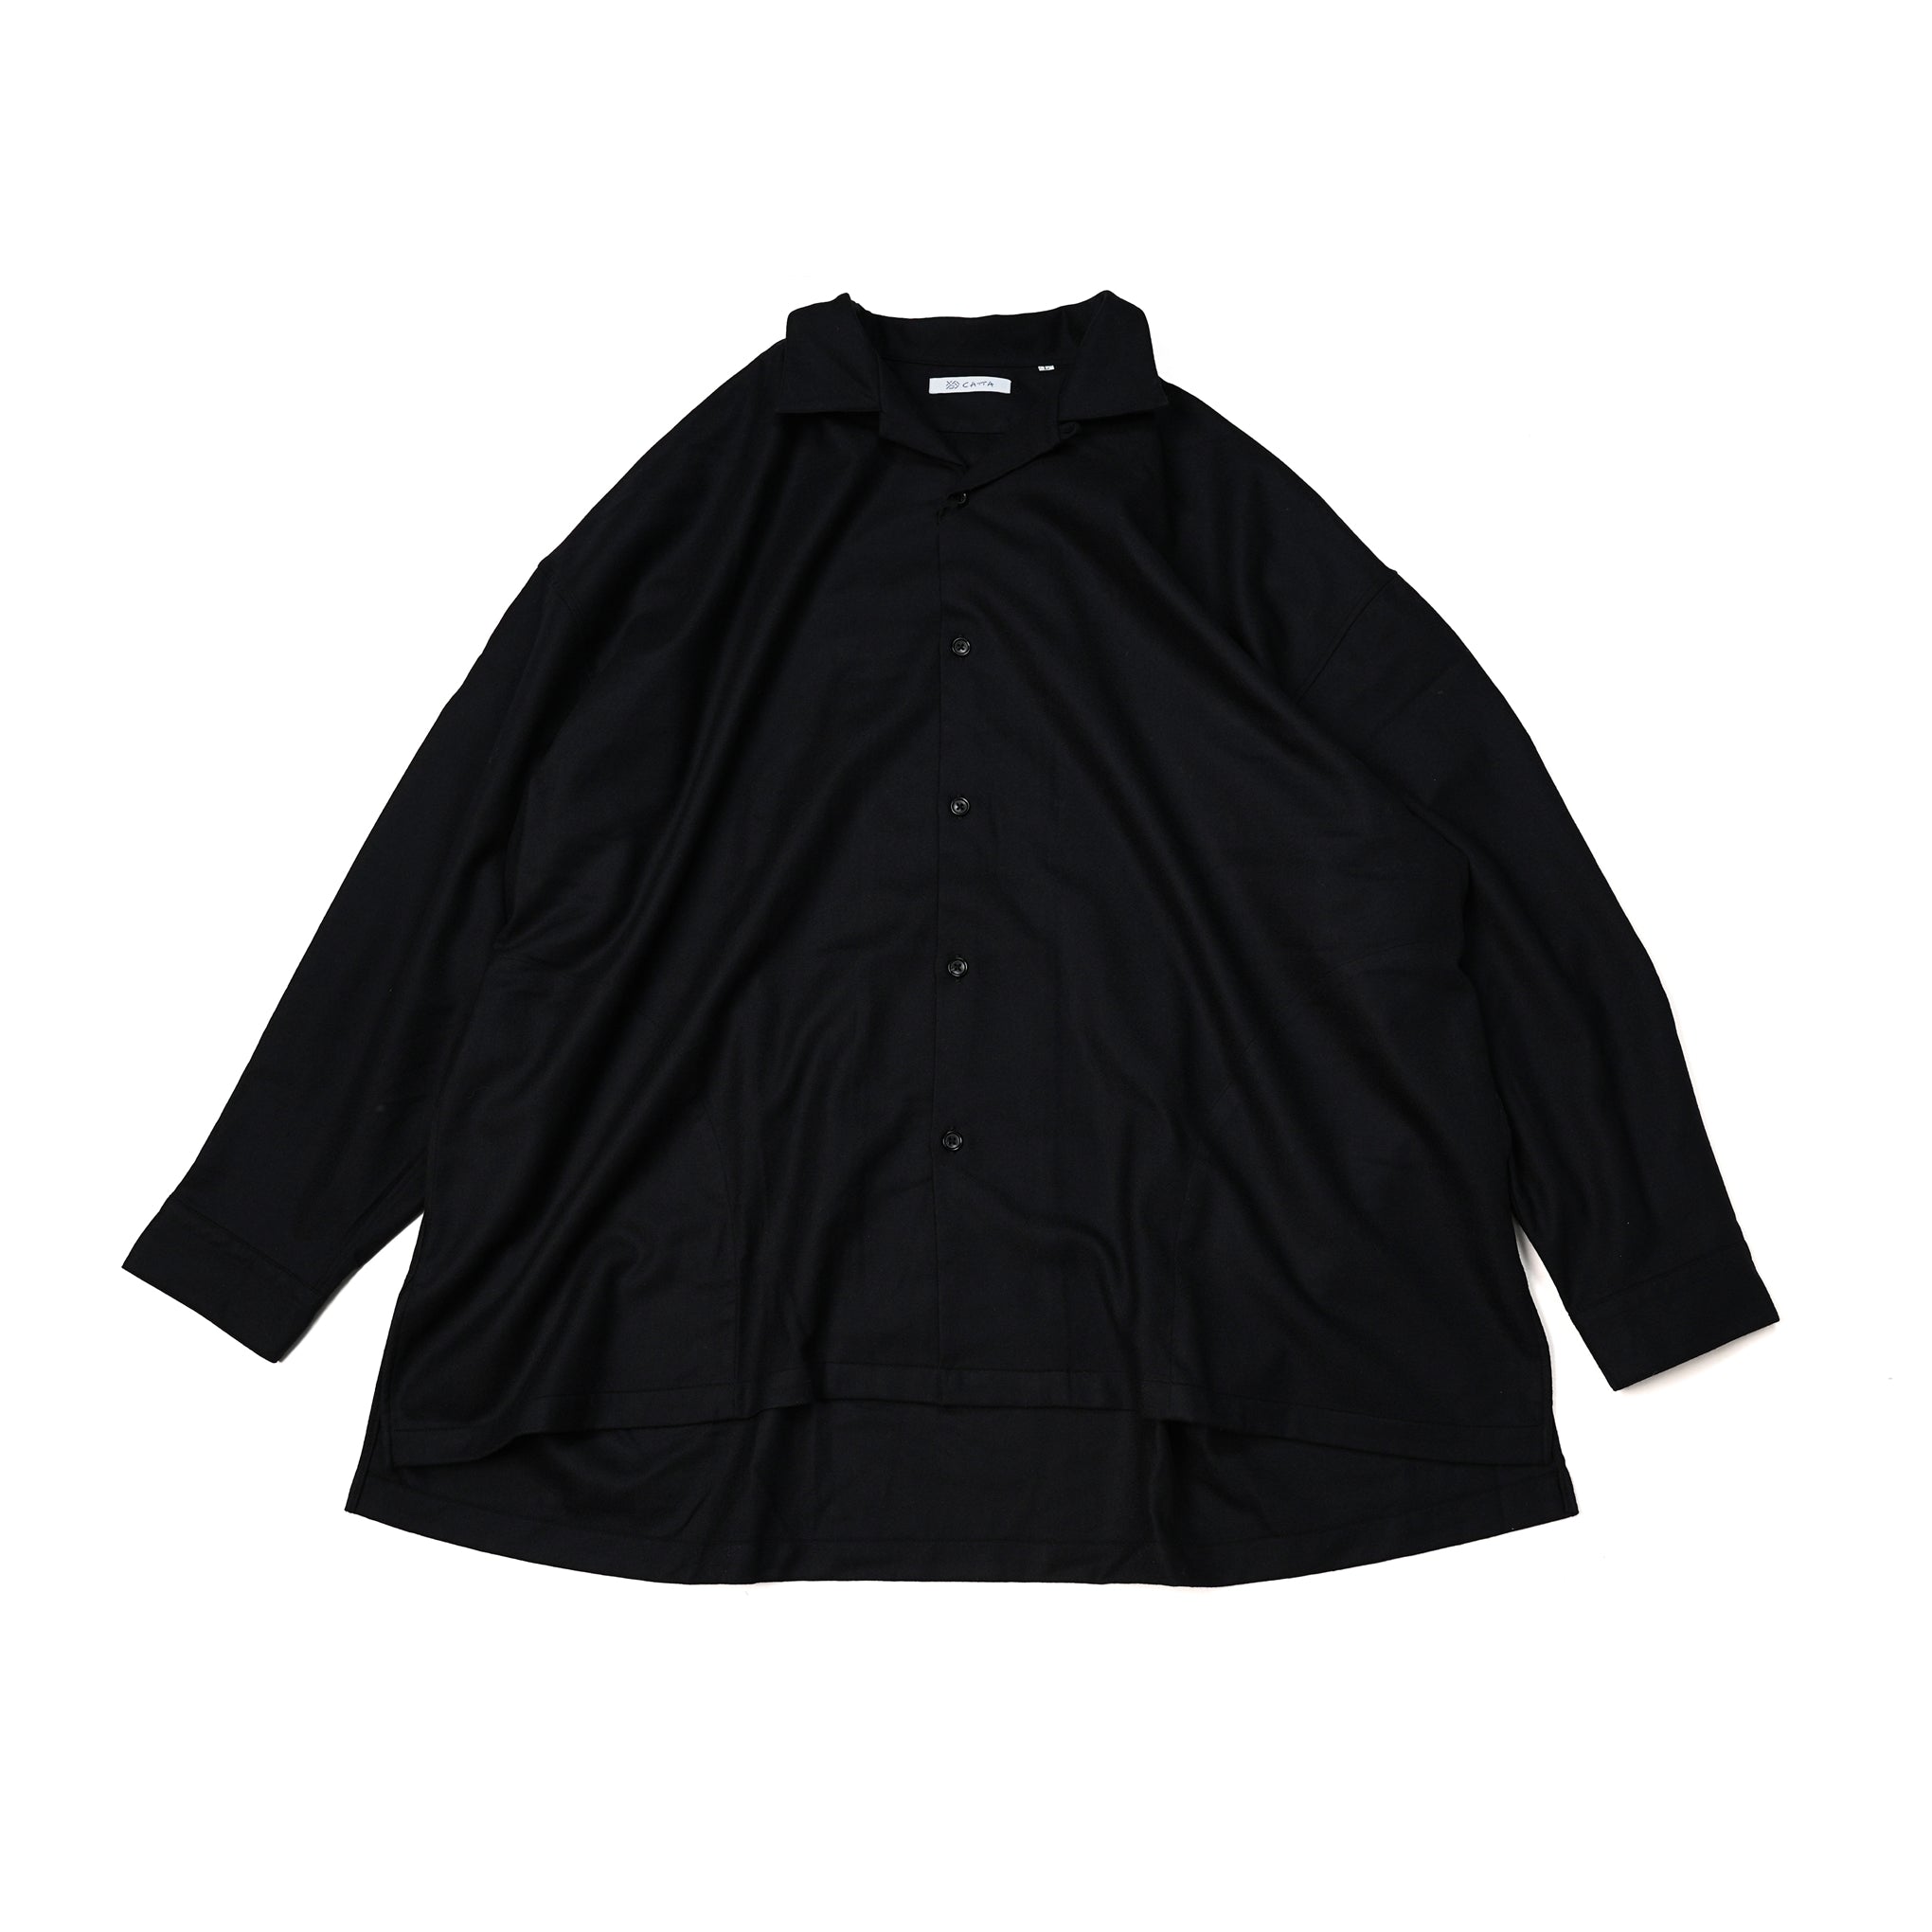 No:2023aw-OP-02 | Name:OPEN COLLAR SHIRT-WOOL FLANNEL | Color:Black【CATTA_カッタ】【入荷予定アイテム・入荷連絡可能】